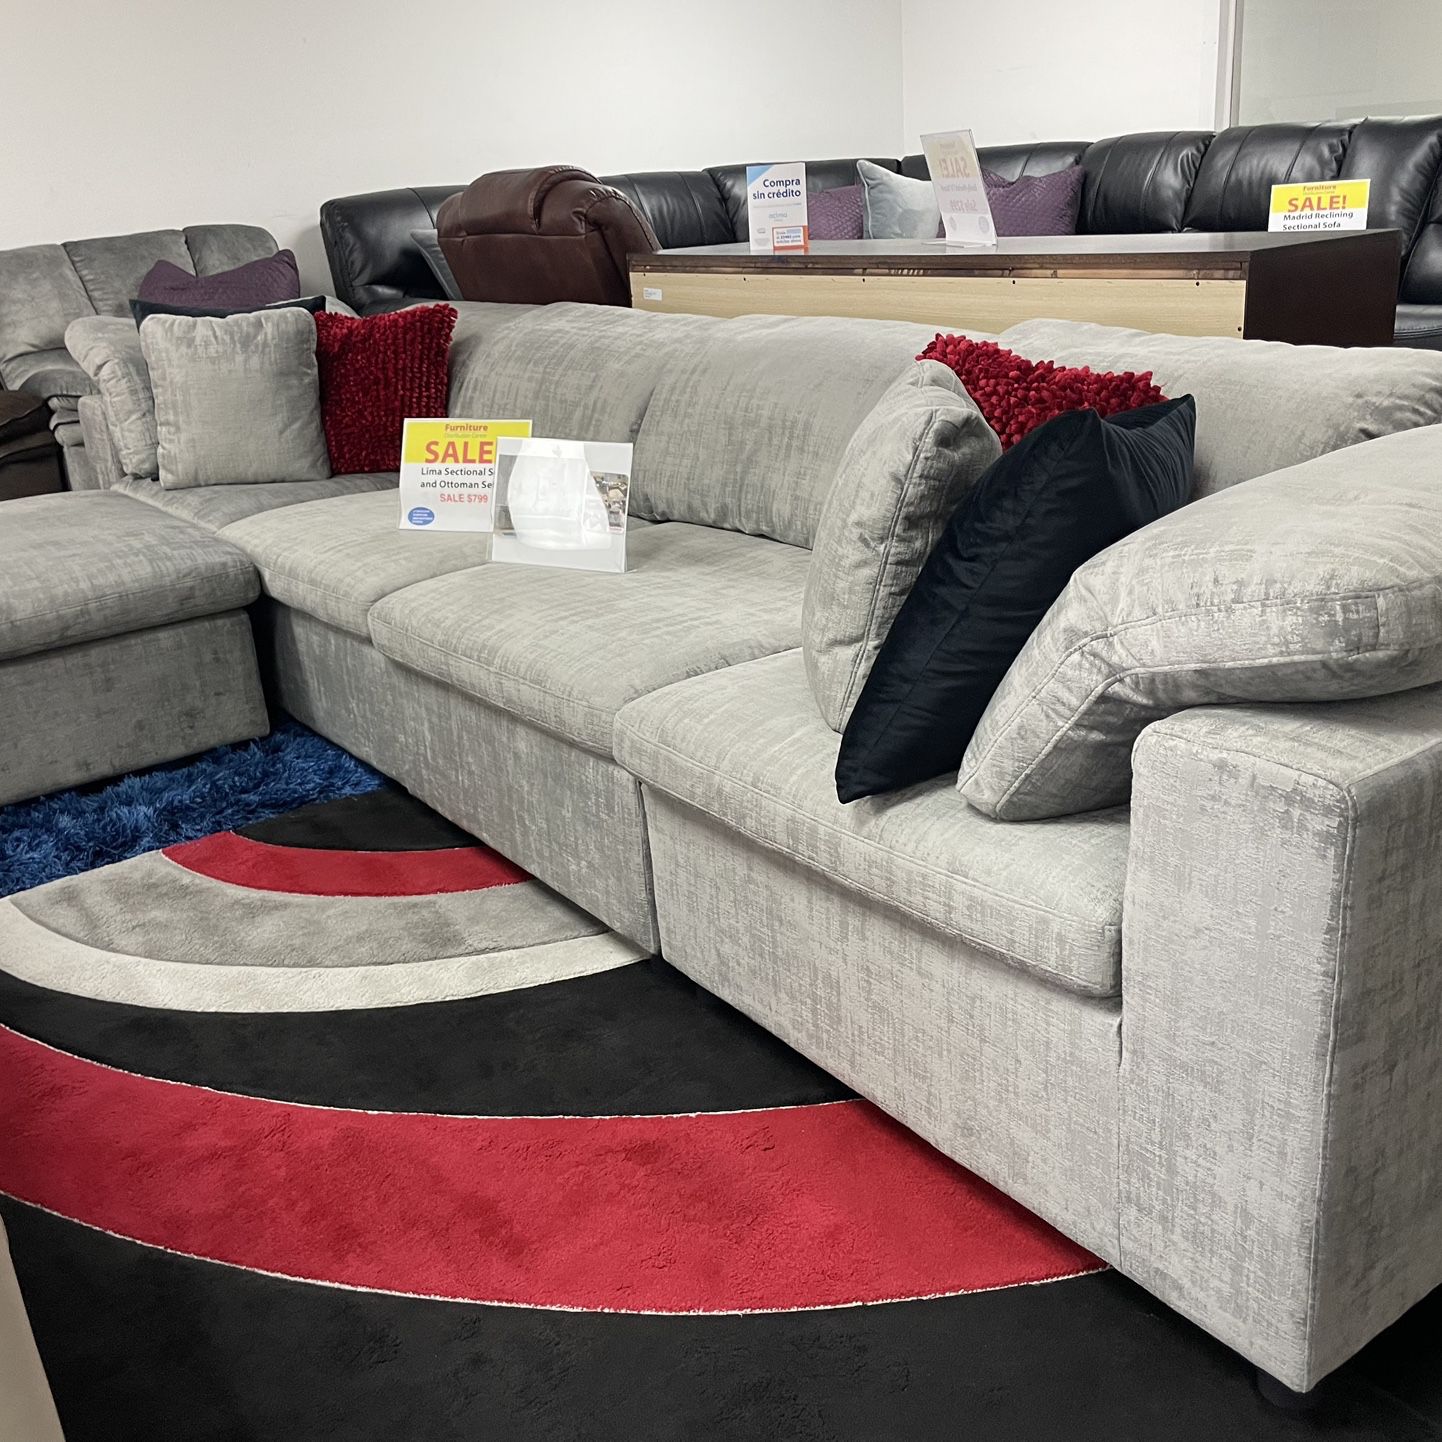 Beautiful Lima Sectional Sofa Set!$799 LIMITED TIME! *EASY FINANCING*HUGE SALE*NO CREDIT NEEDED*